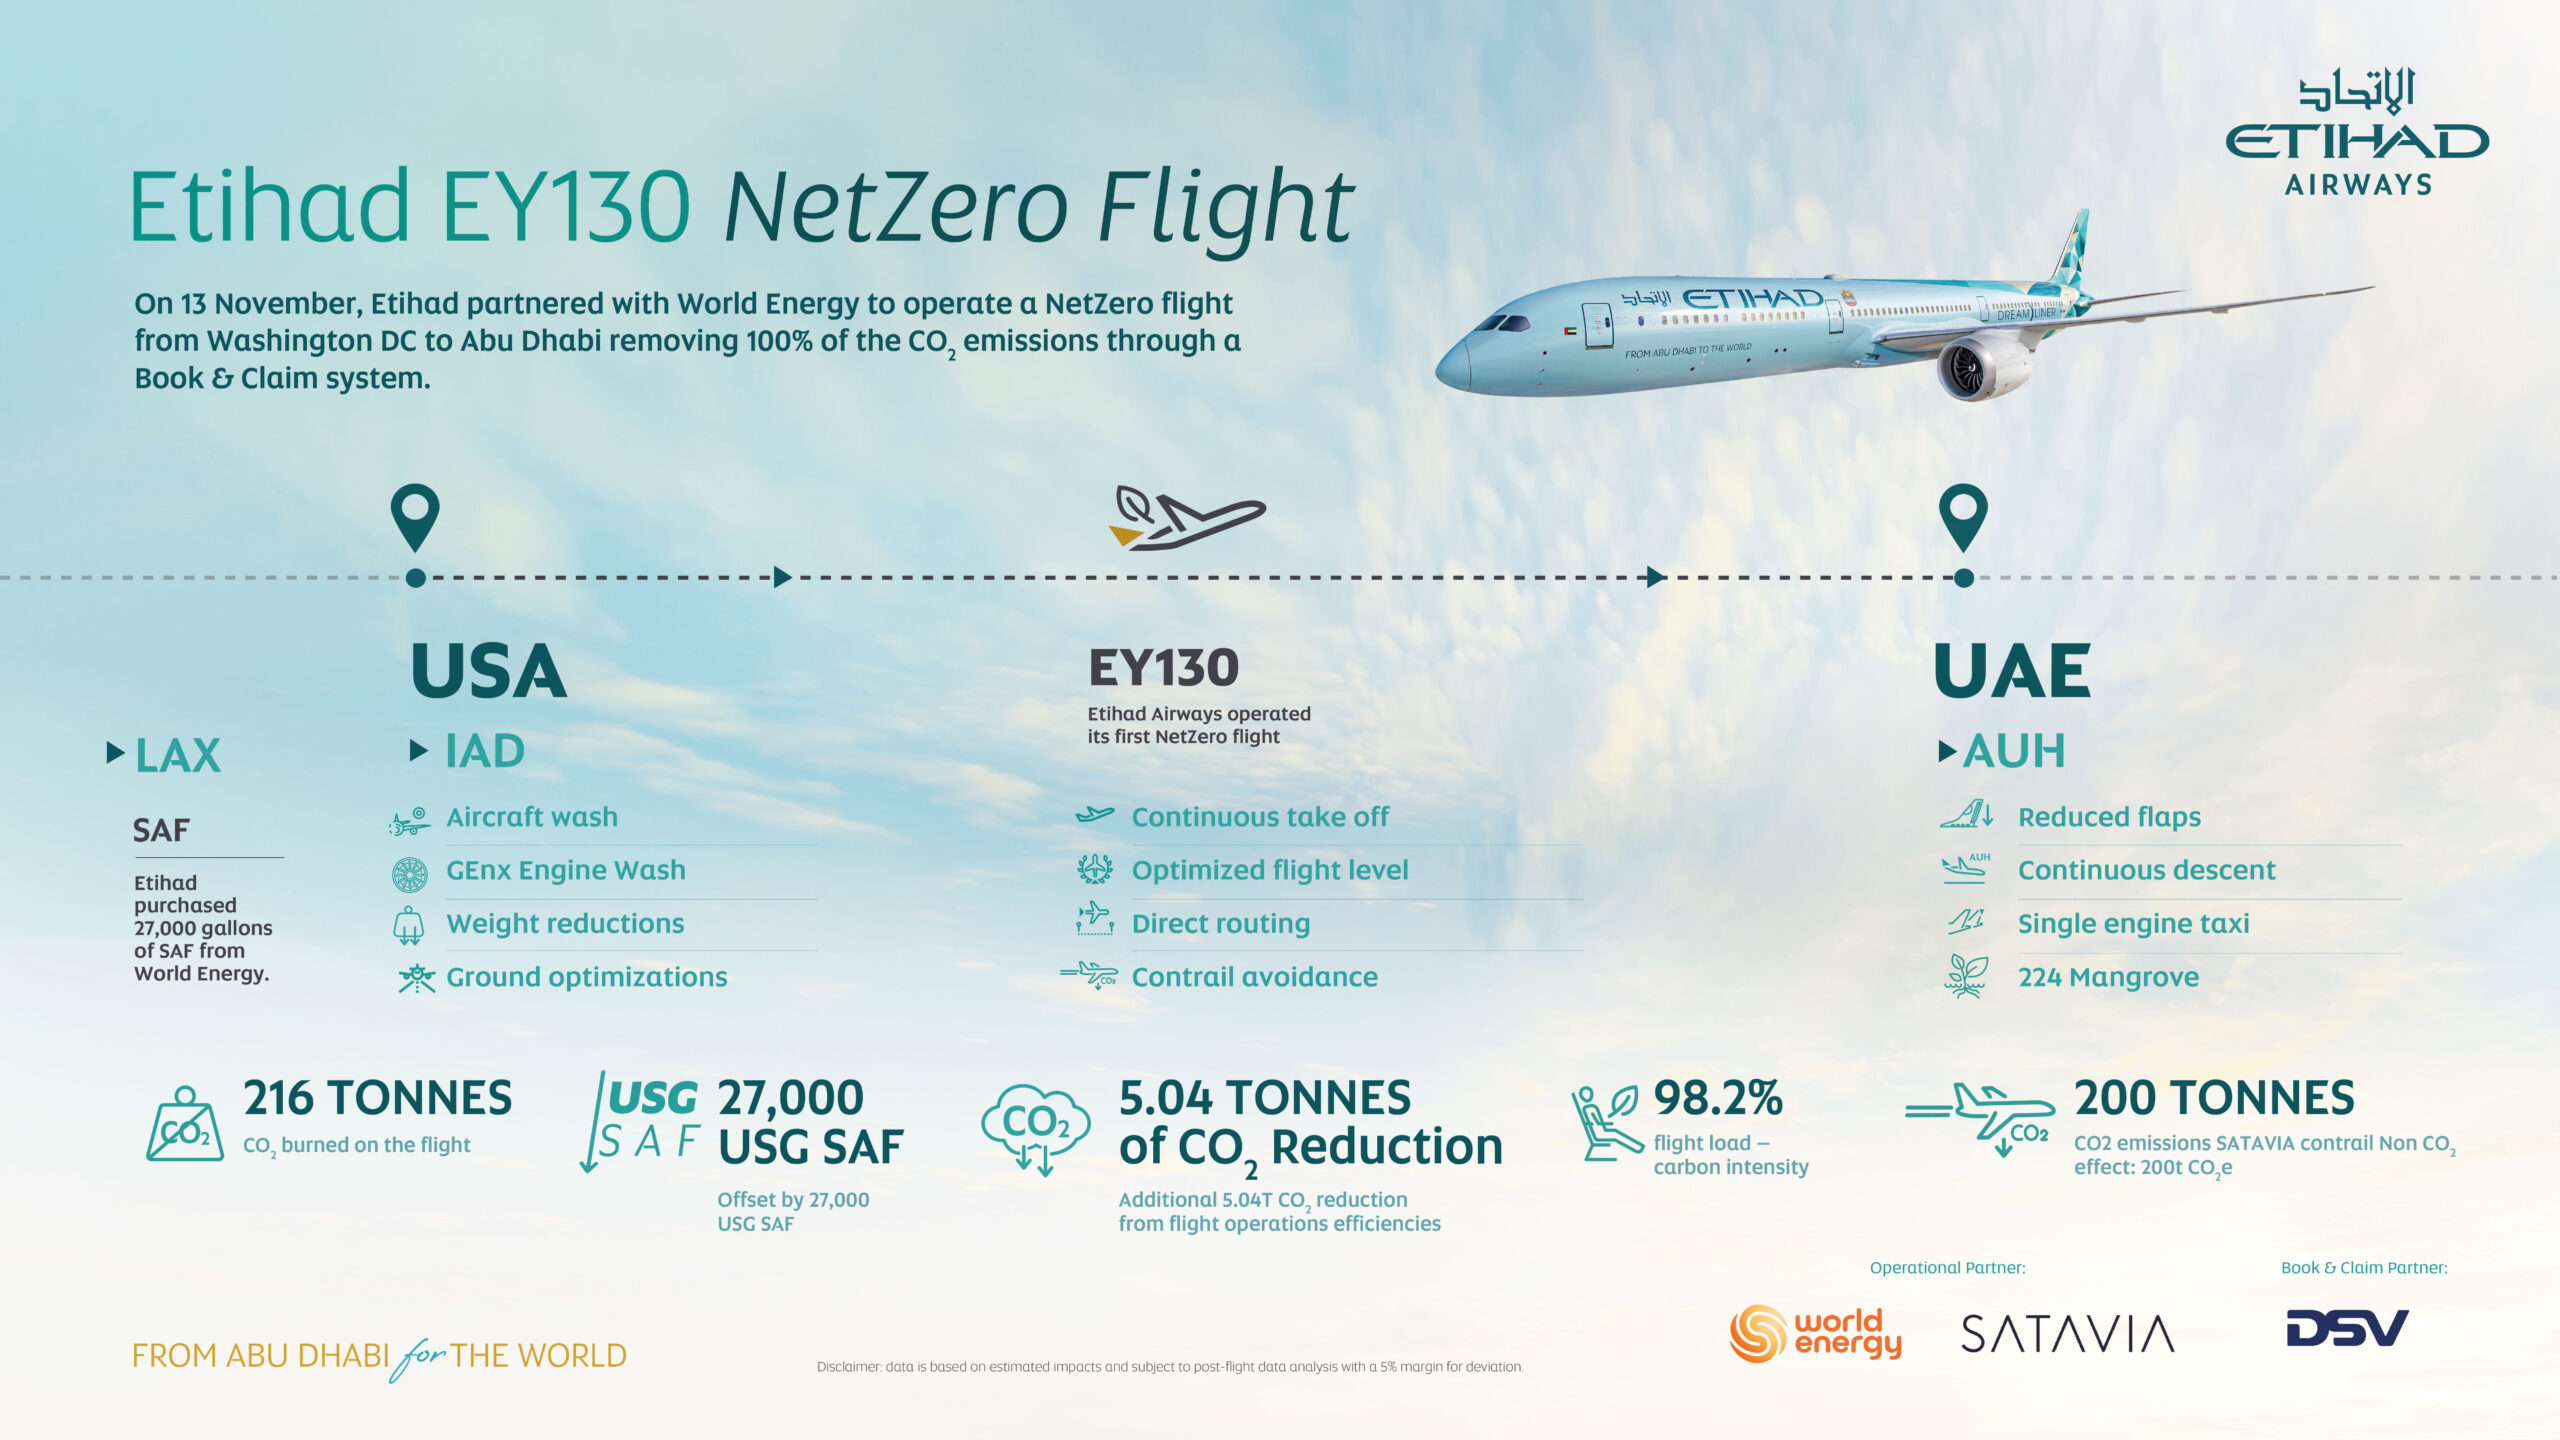 ETIHAD AIRWAYS AND WORLD ENERGY DEMONSTRATE THE FUTURE OF AVIATION WITH SUCCESSFUL NET-ZERO EMISSIONS FLIGHT BASED ON BOOK & CLAIM